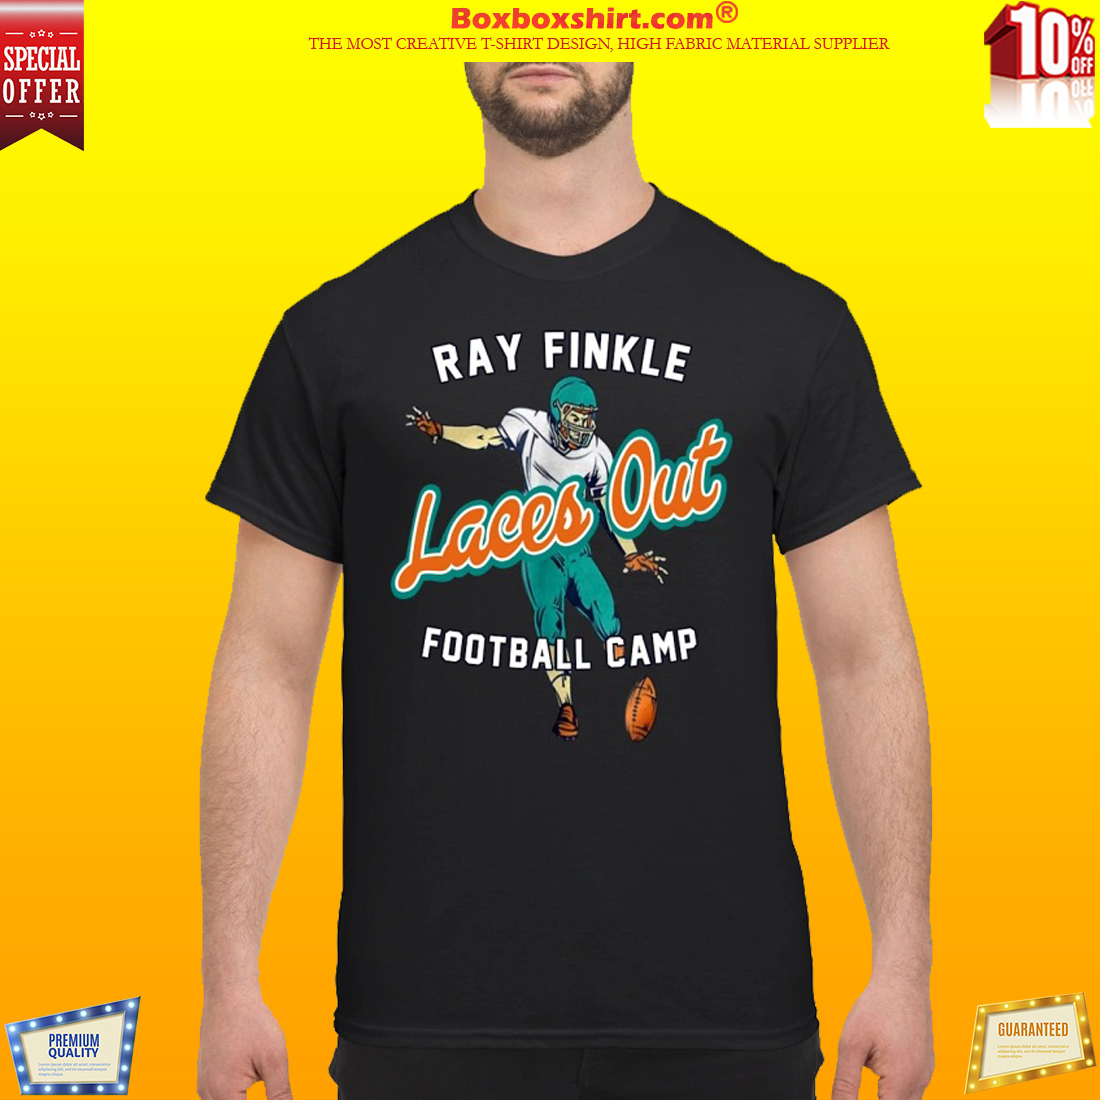 Ray Finkle laces out football camp shirt